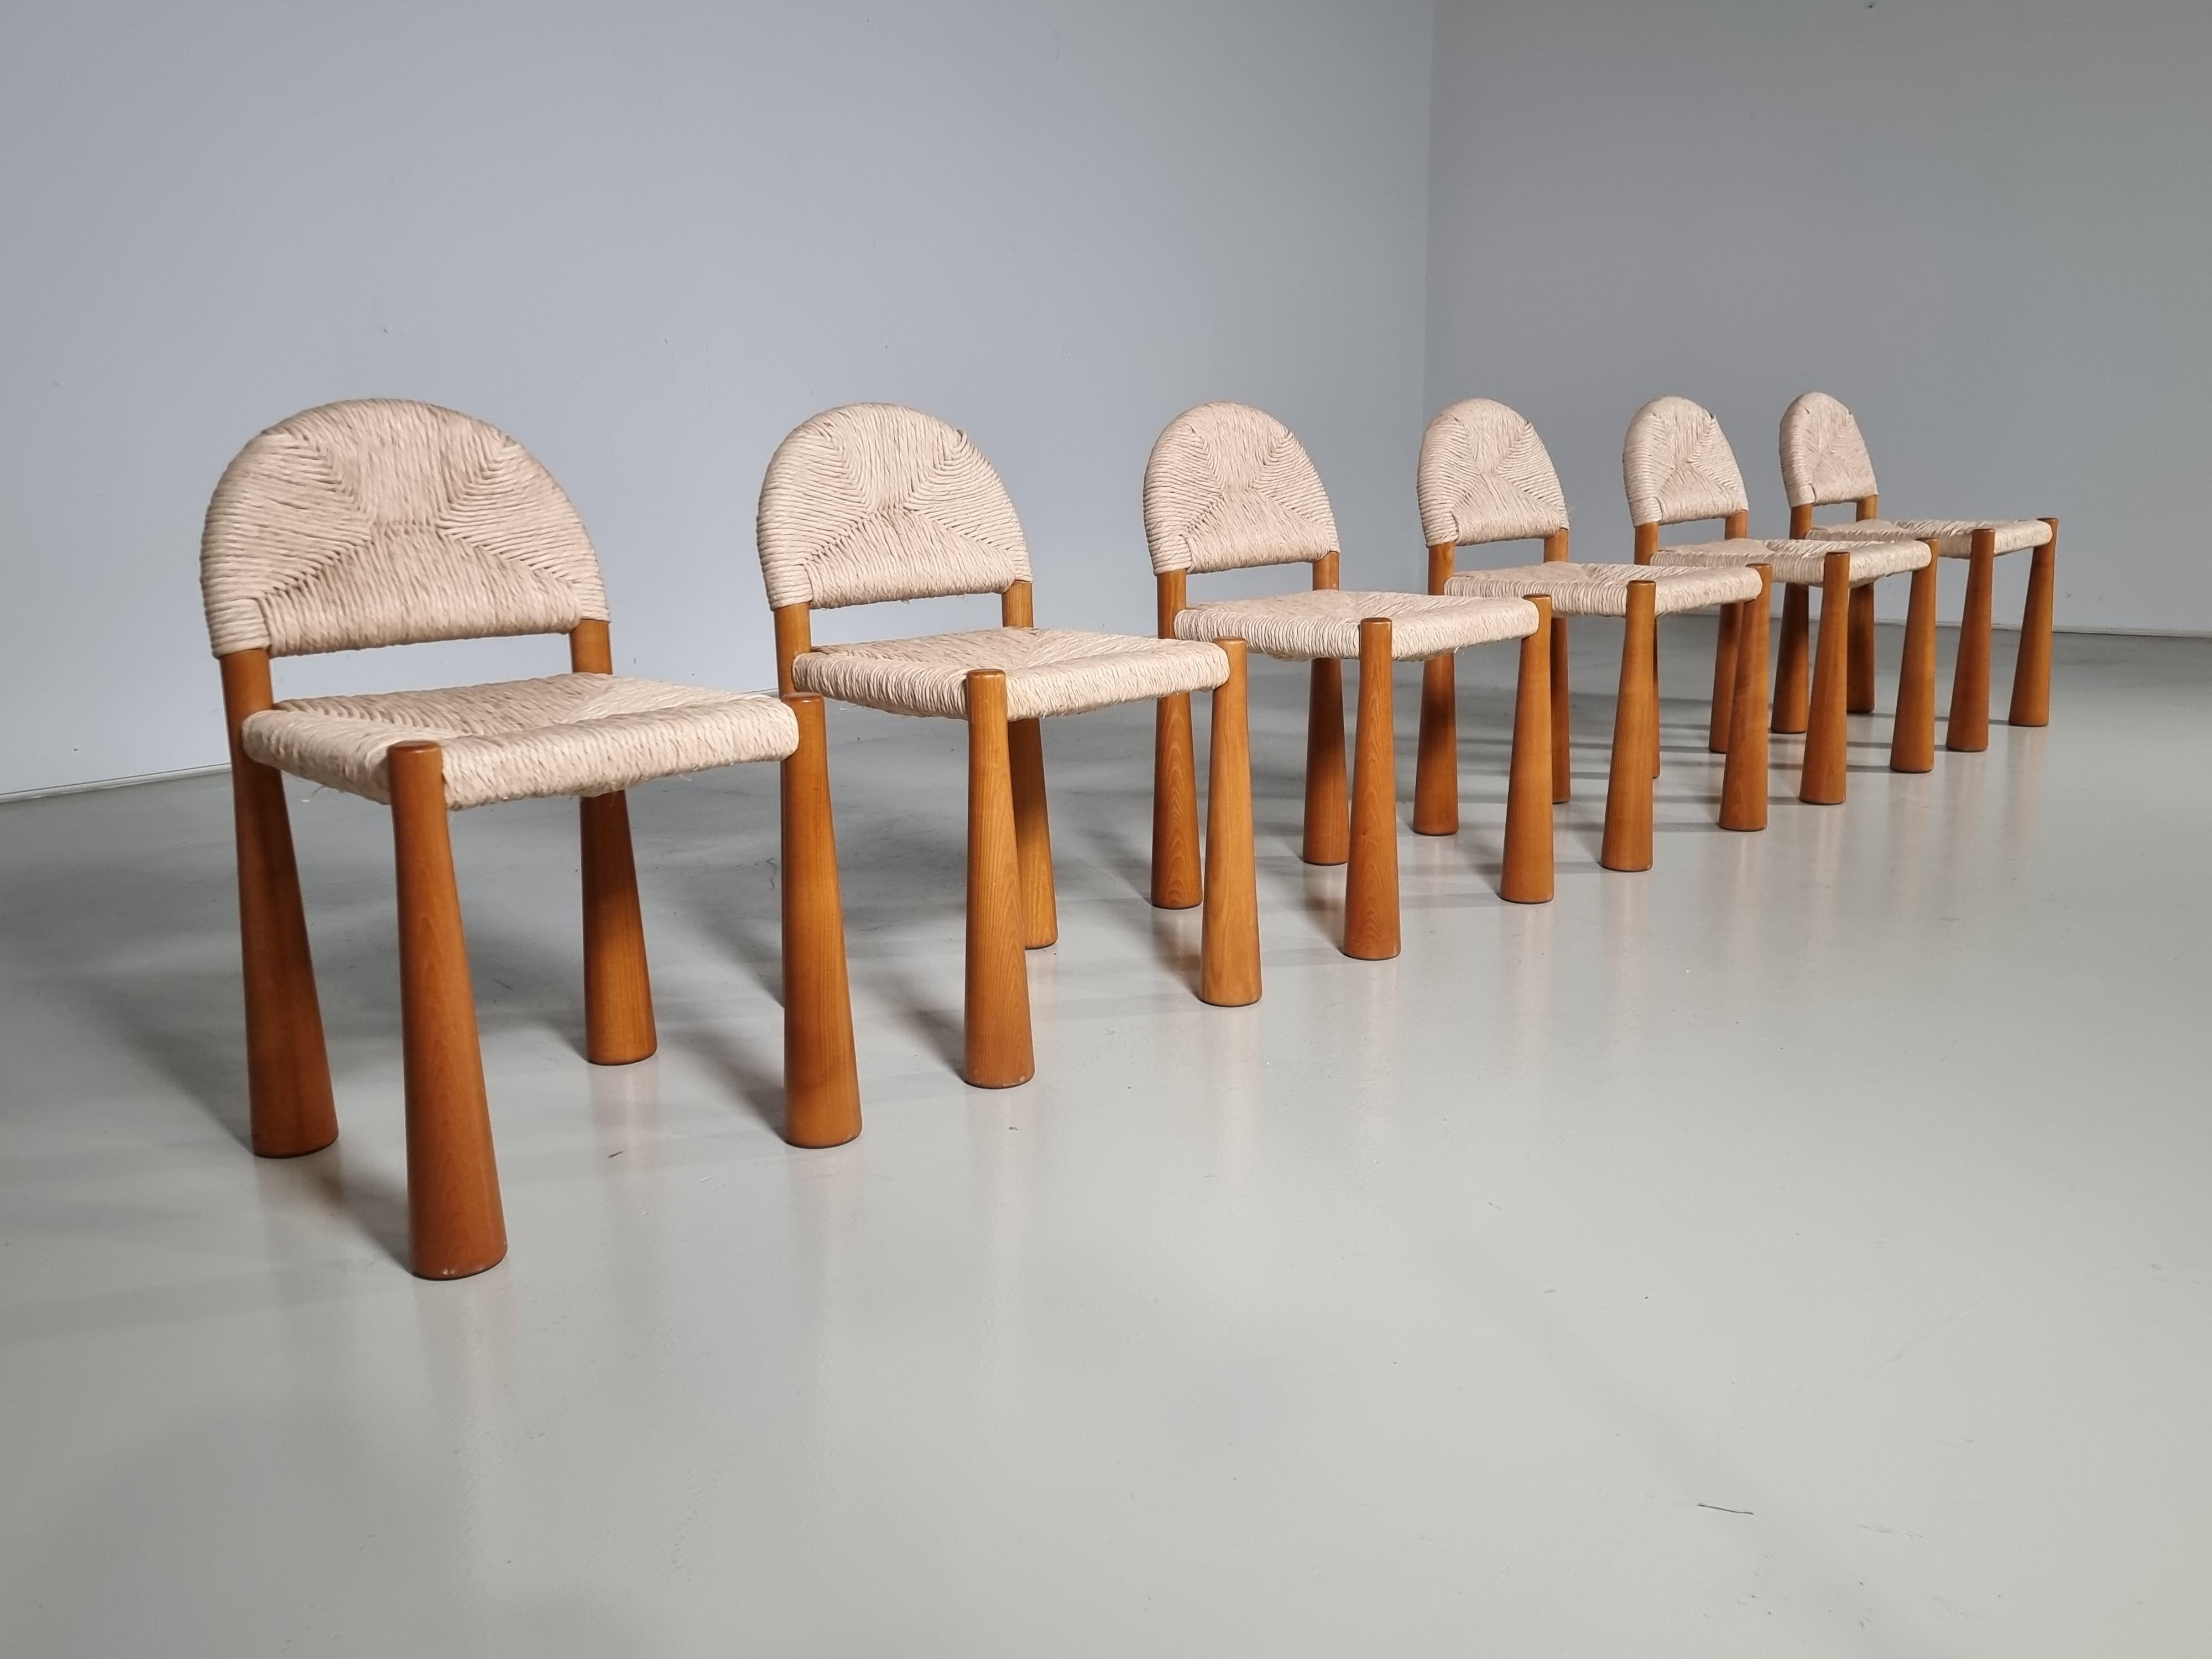 Very rare set of 6 Toscanolla dining chairs. Designed by Becchi (1946-1987) in 1970, for Giovannetti.  Becchi is also the designer of the famous Anfibio sofa.

Unique chairs with smooth lines, make it a perfect addition to any home decor style.